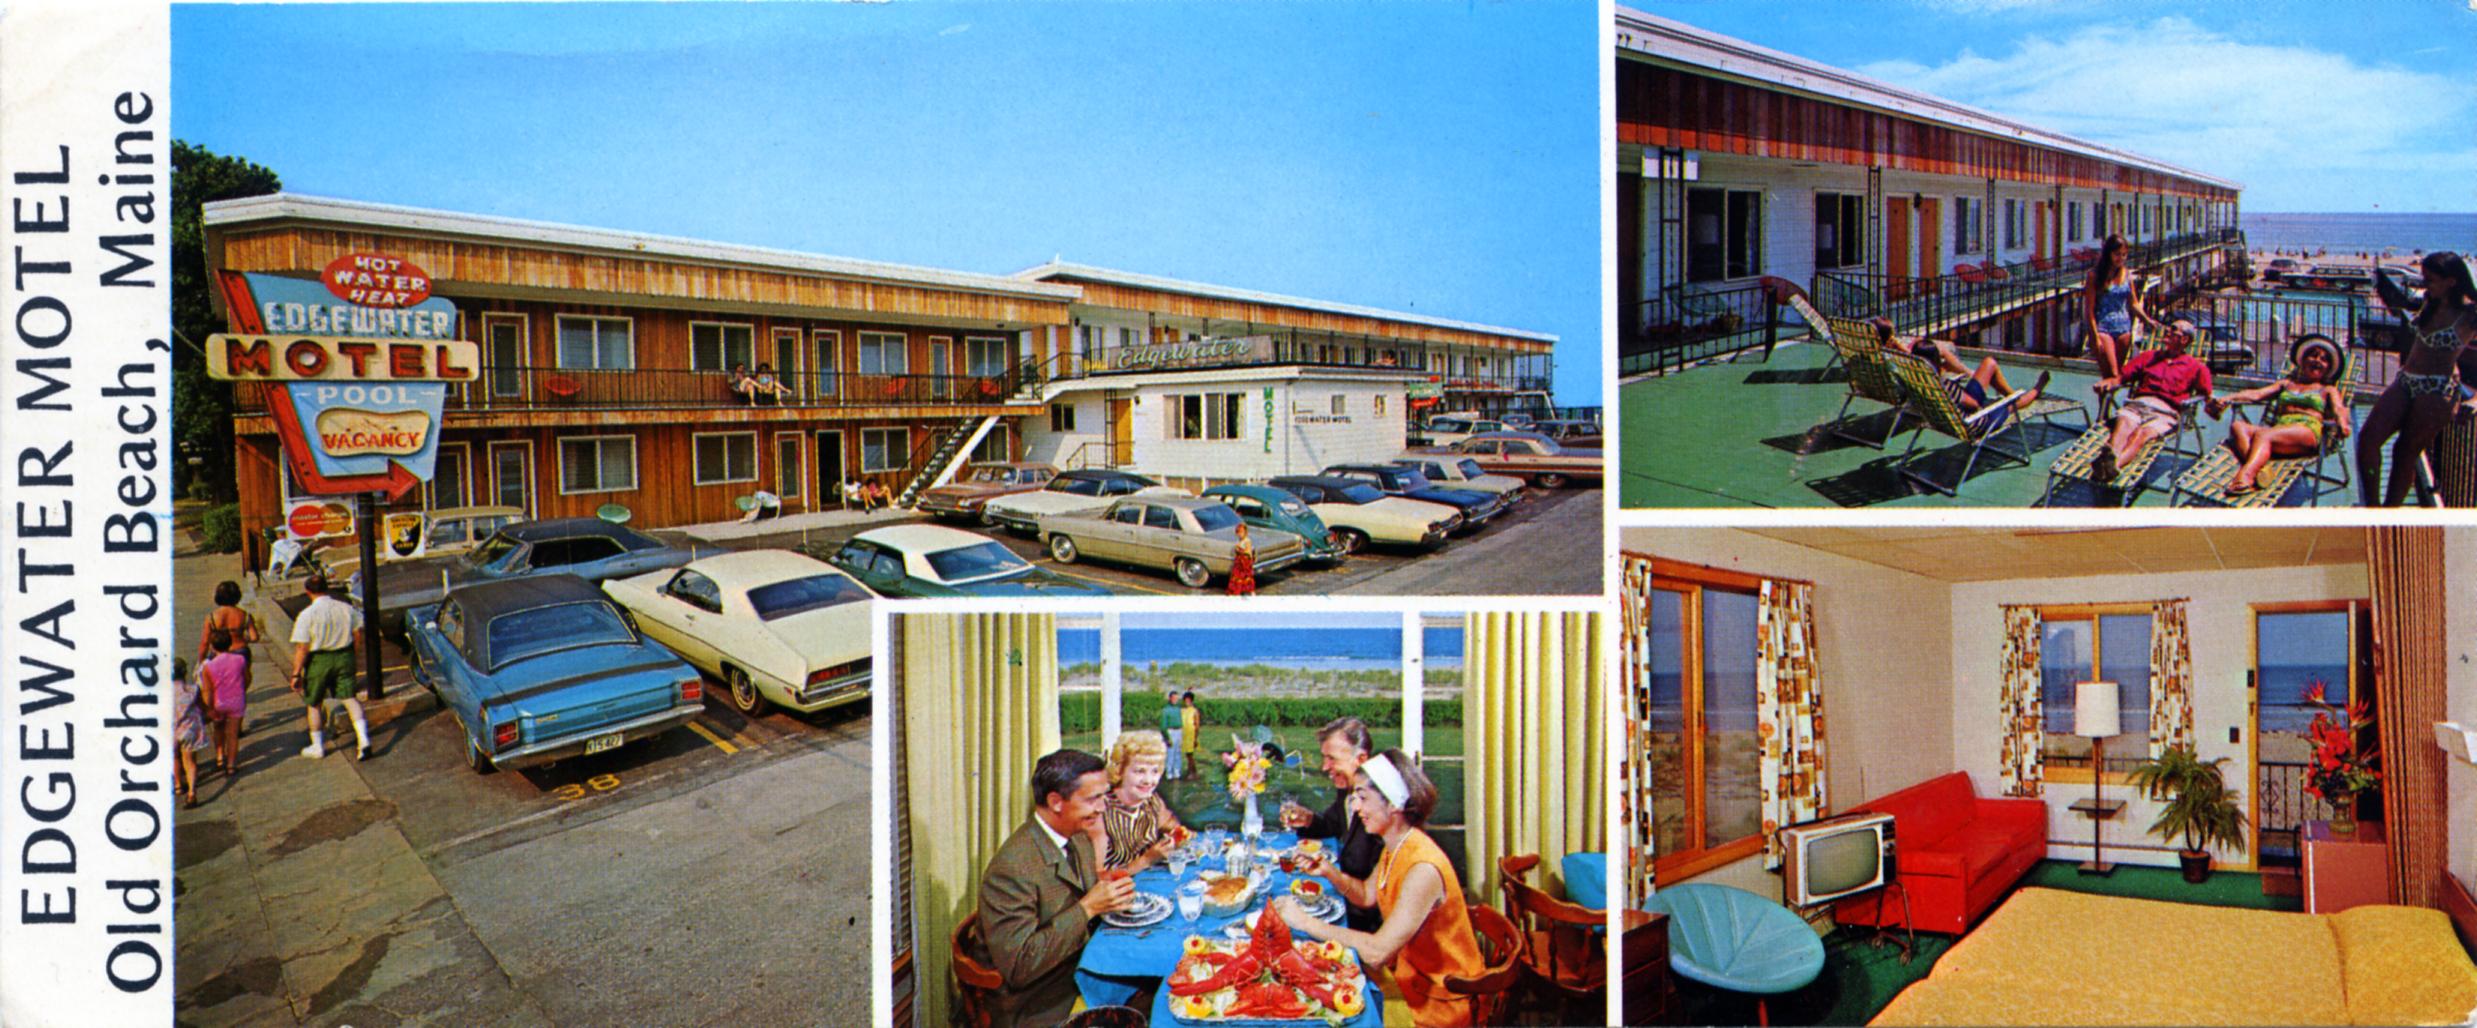 Edgewater Motel - 57 West Grand Avenue, Old Orchard Beach, Maine U.S.A. - 1960's